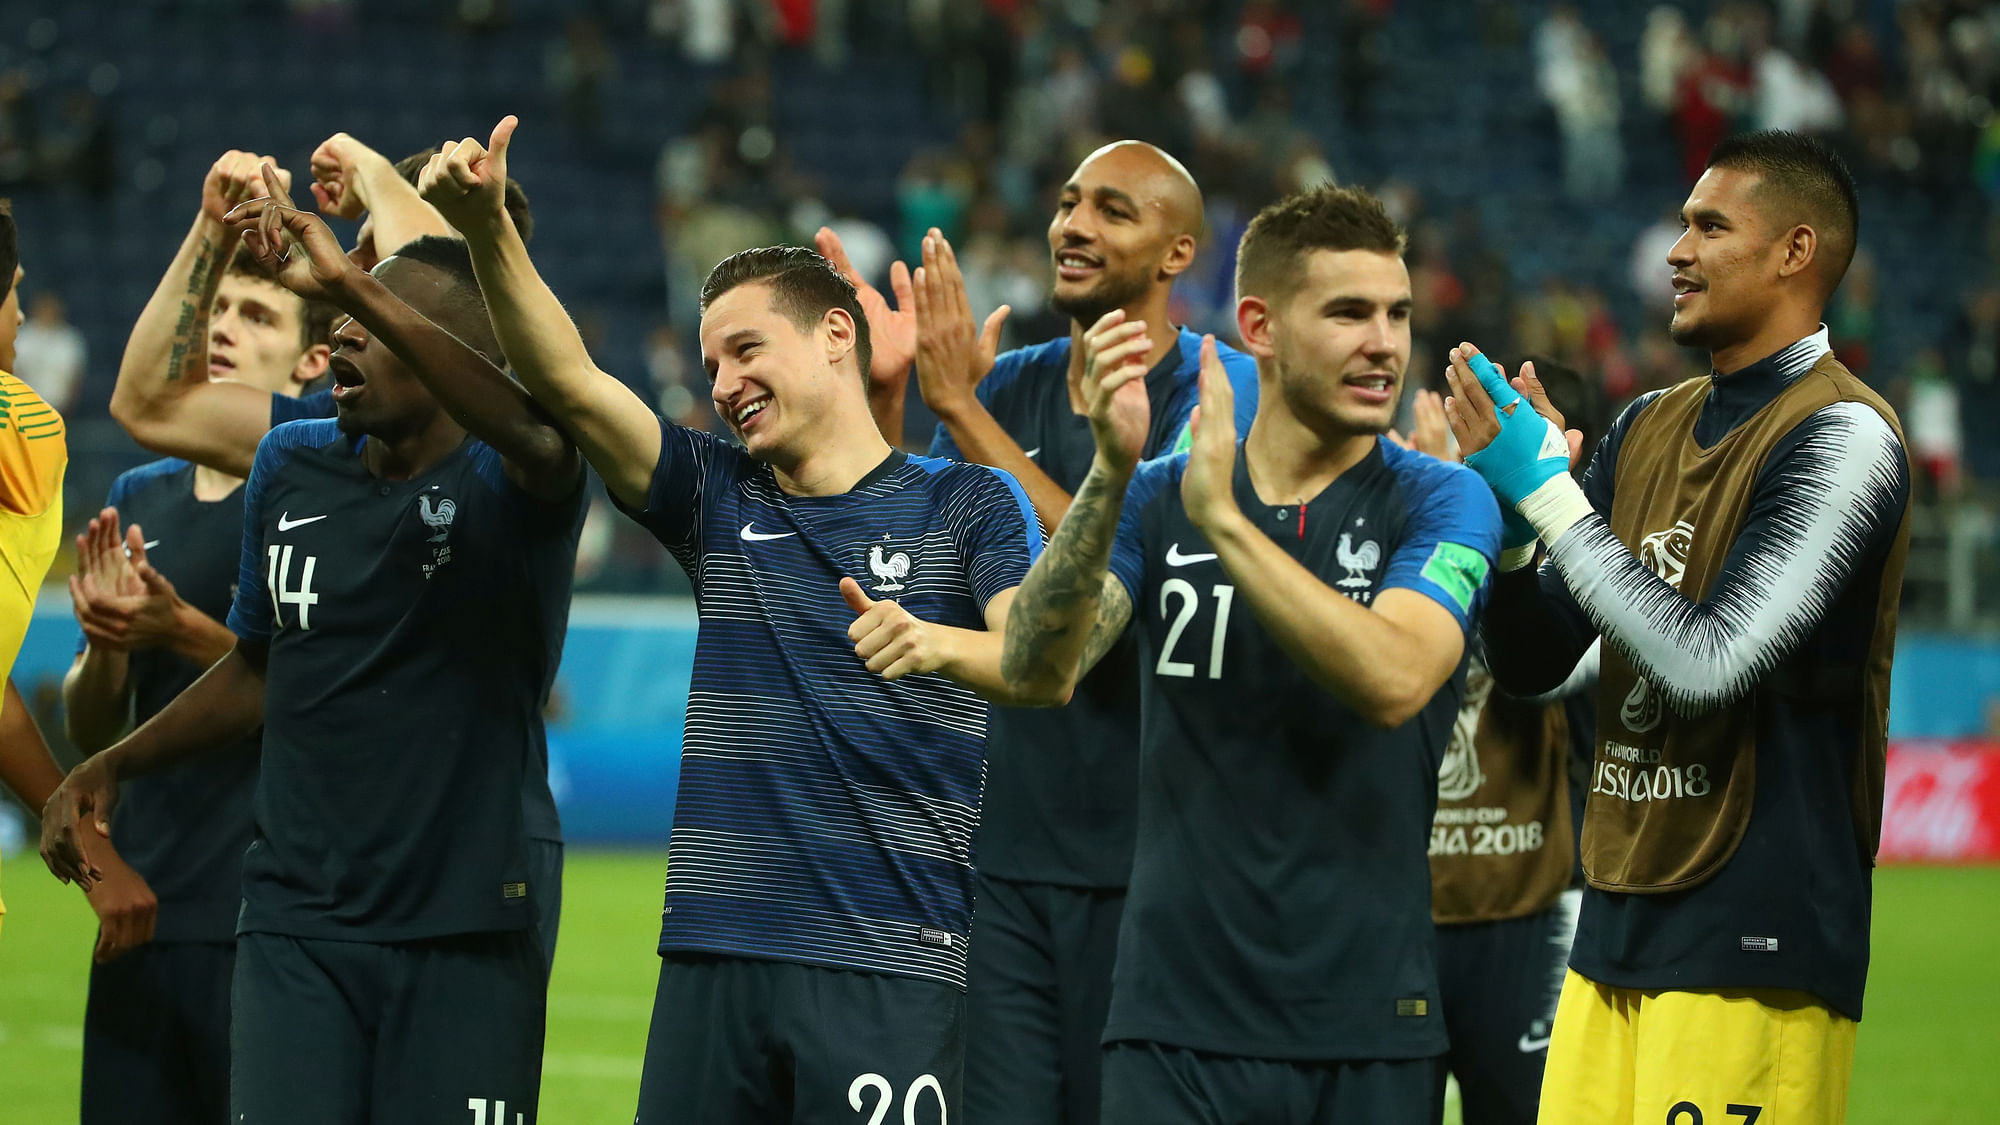 France beat Belgium 1-0 to qualify for the finals of the 2018 FIFA World Cup.